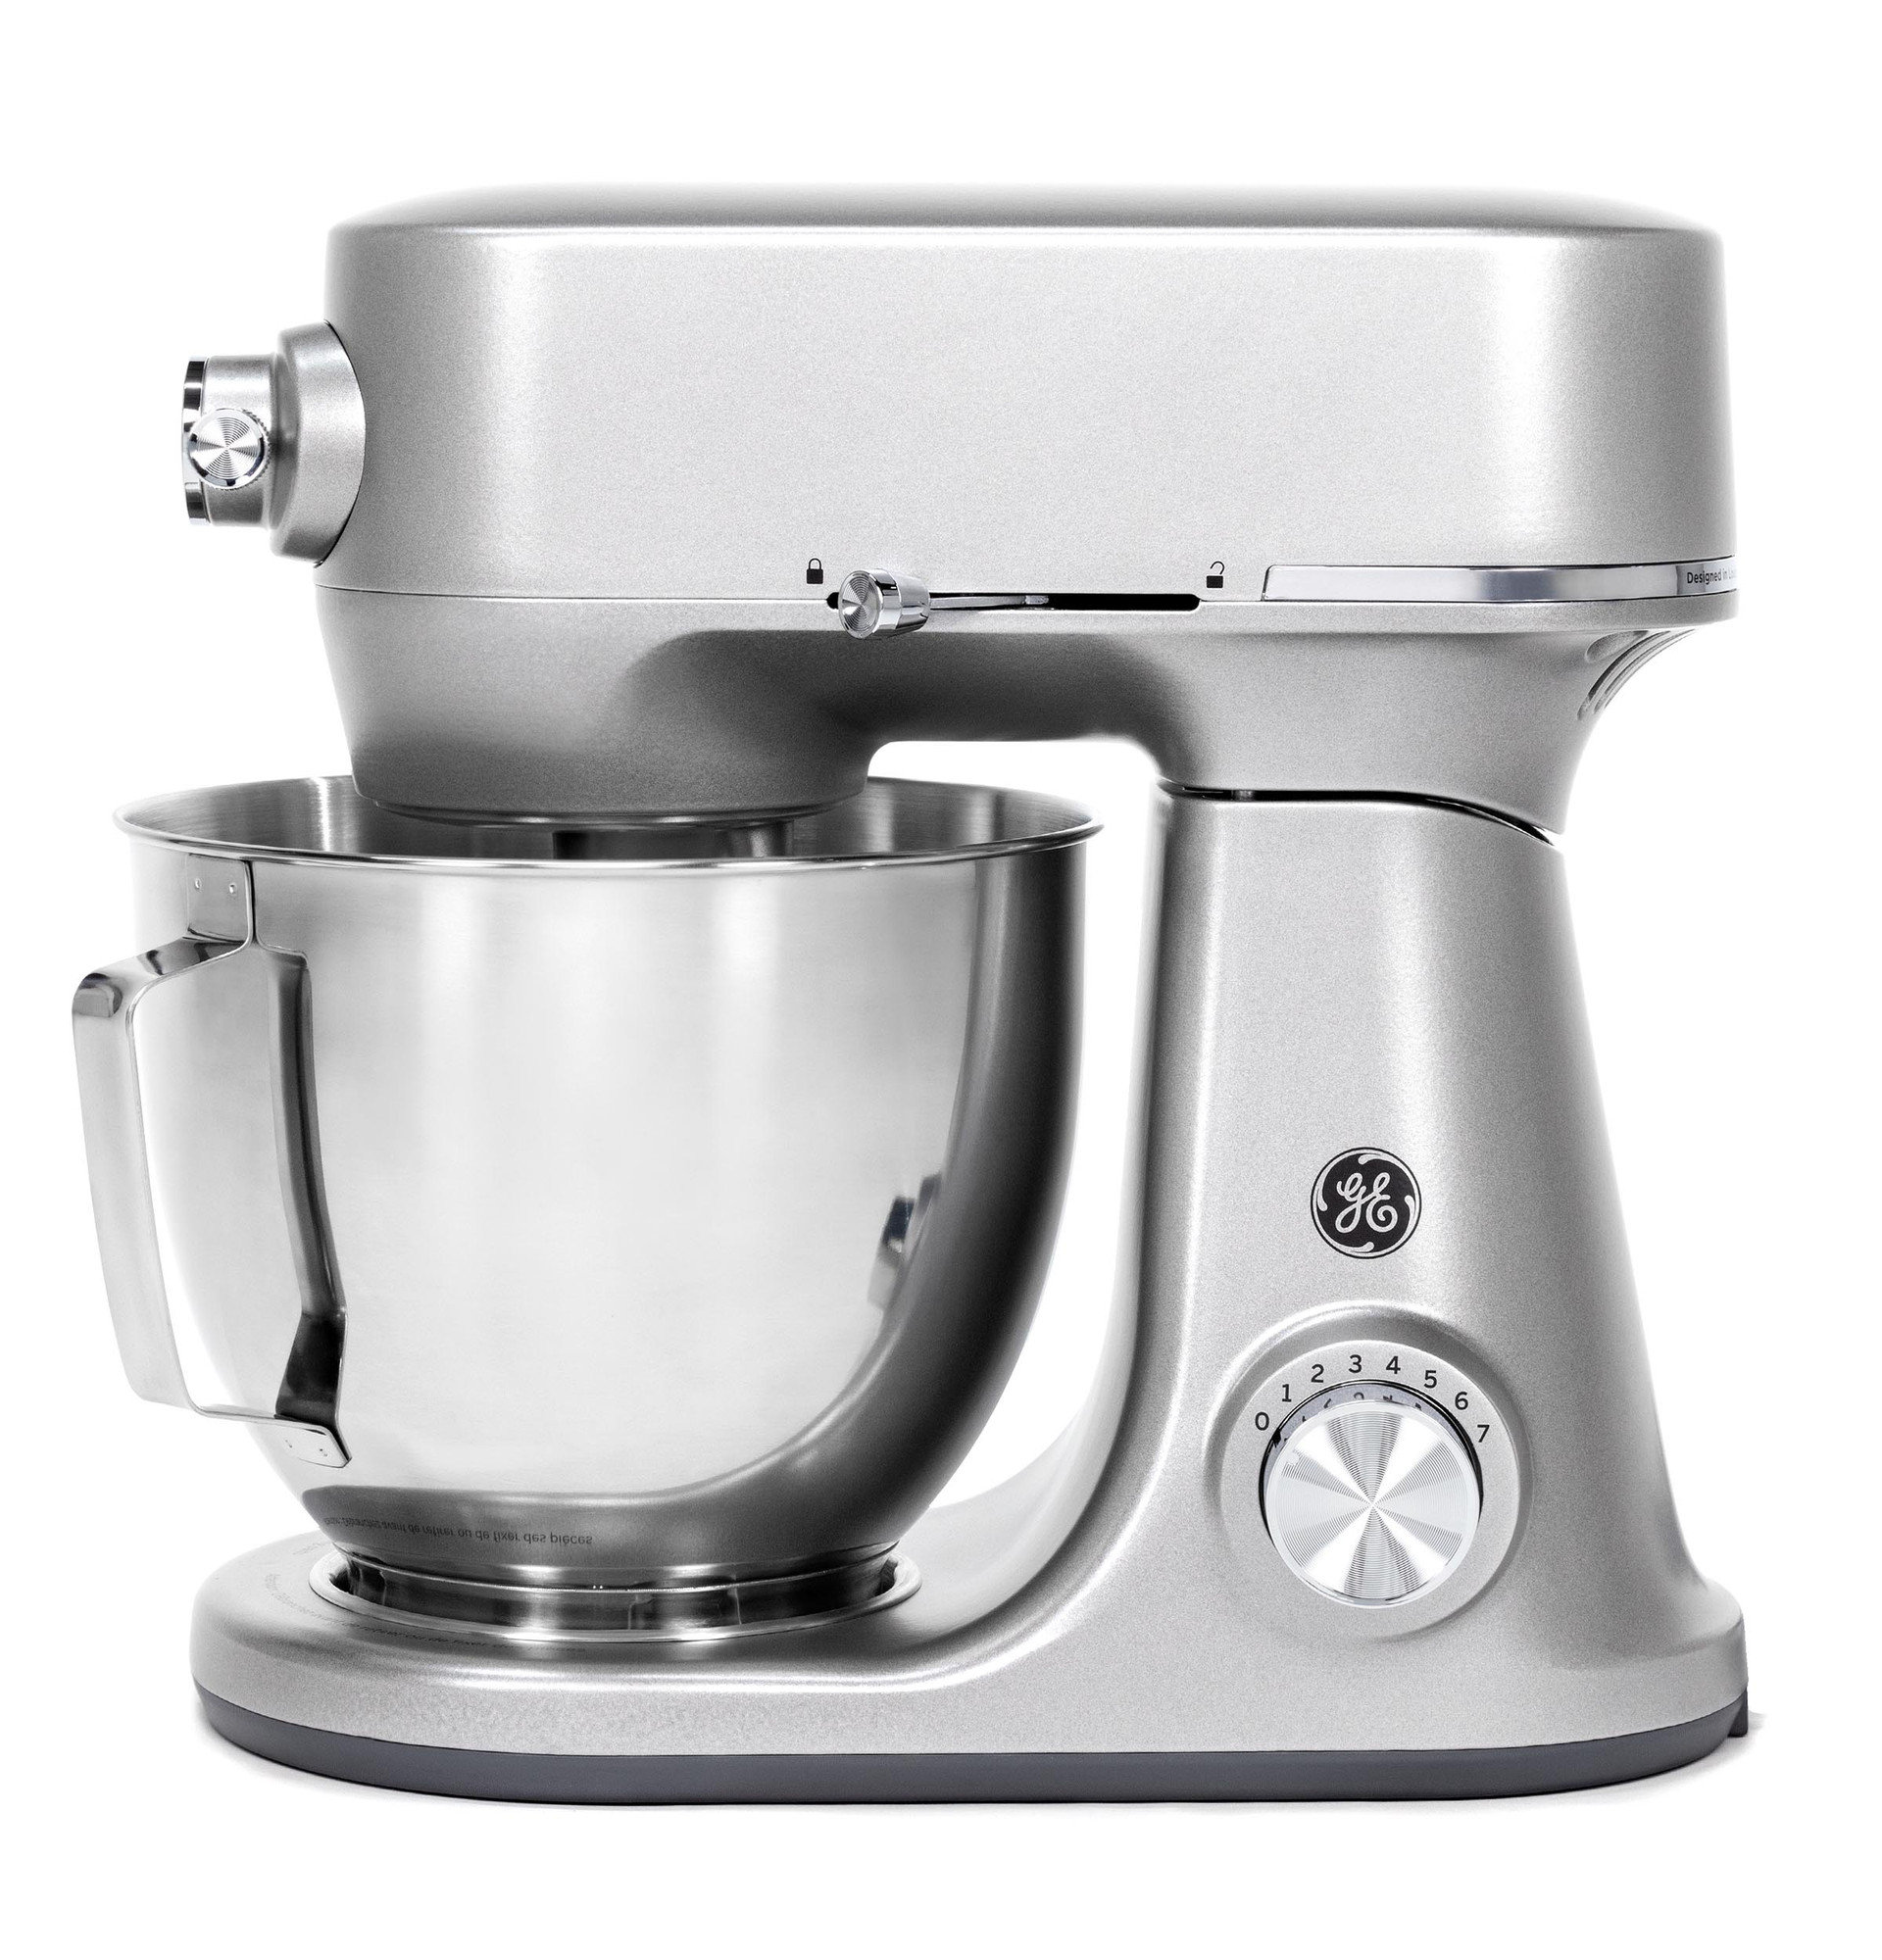 Stainless Steel Pouring Chute,Pouring Chute Compatible with KitchenAid  Stand Mixer with Stainless Steel Bowl, Silver